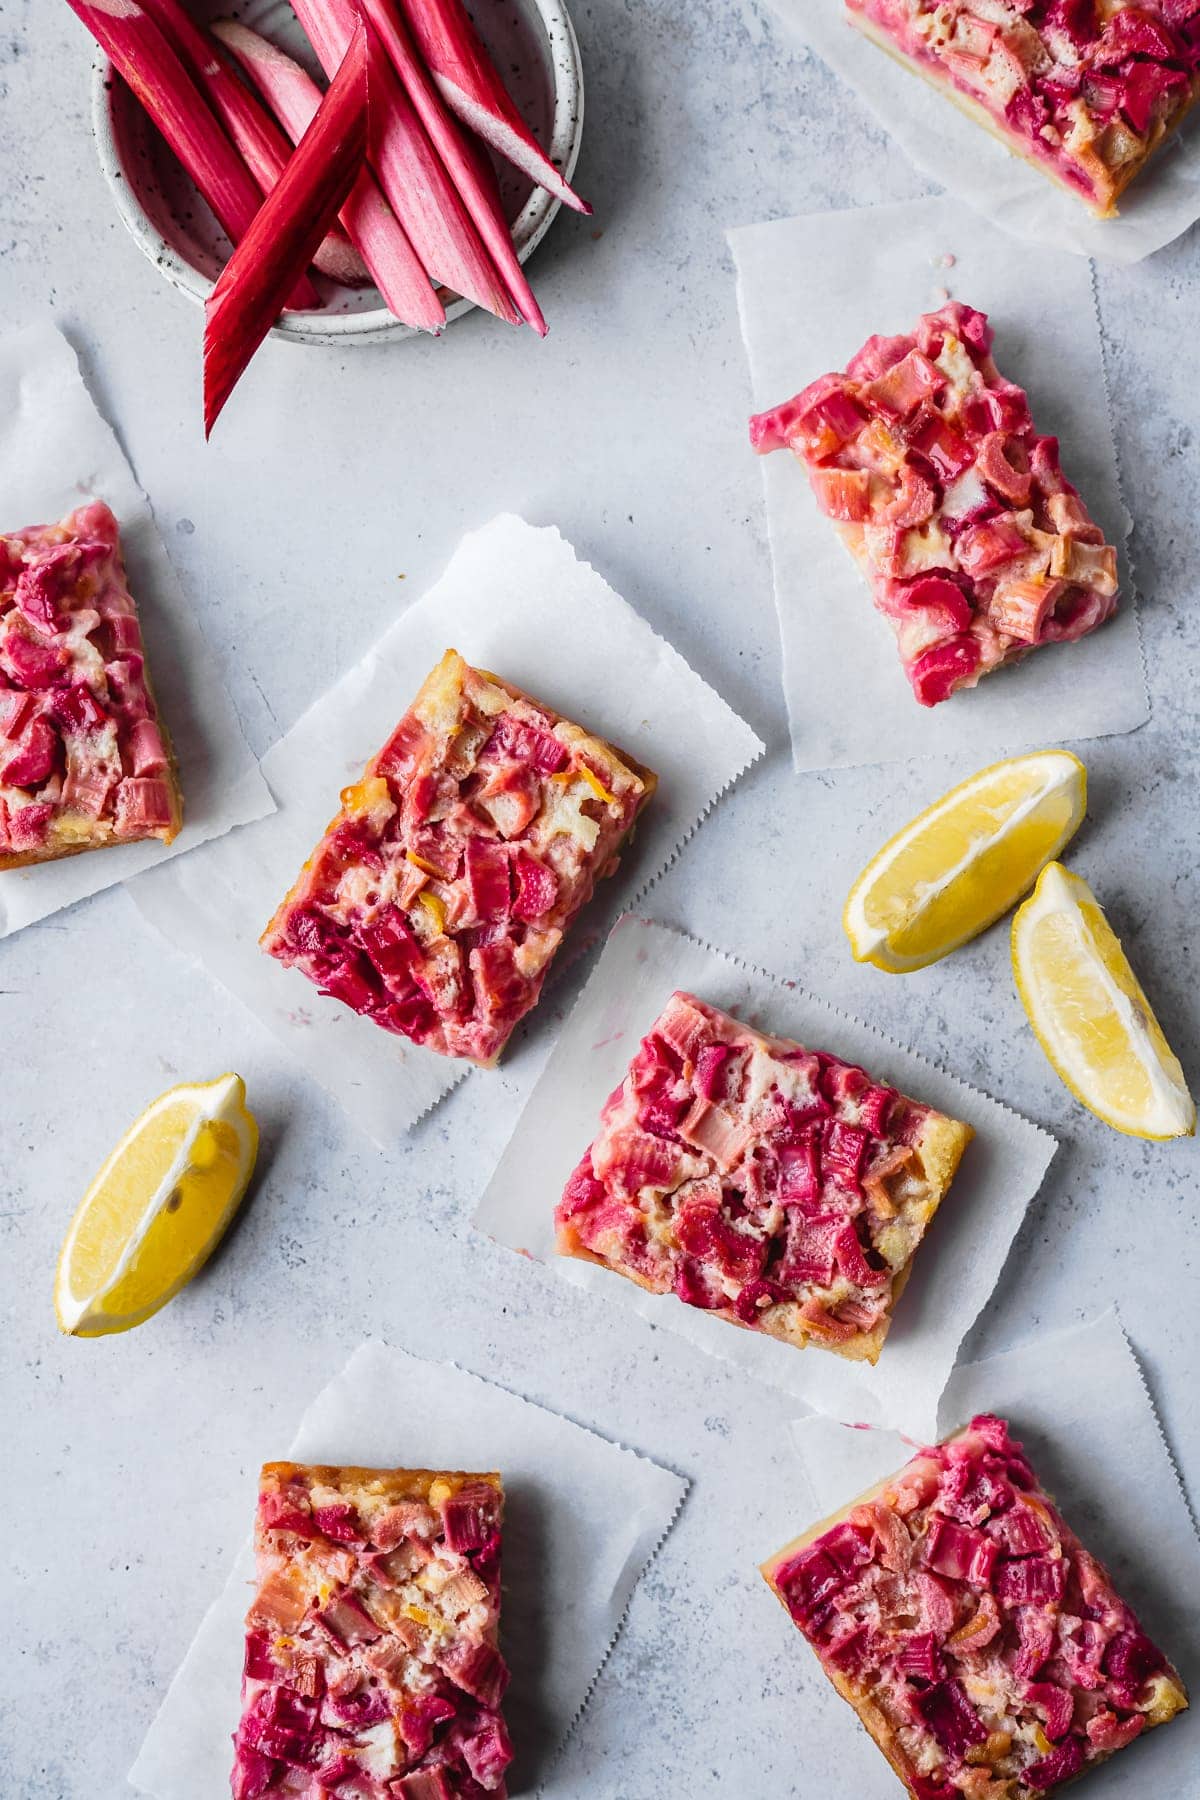 Bar cookies arranged on parchment paper strips on a white background with sliced lemons and a bowl of rhubarb nearby